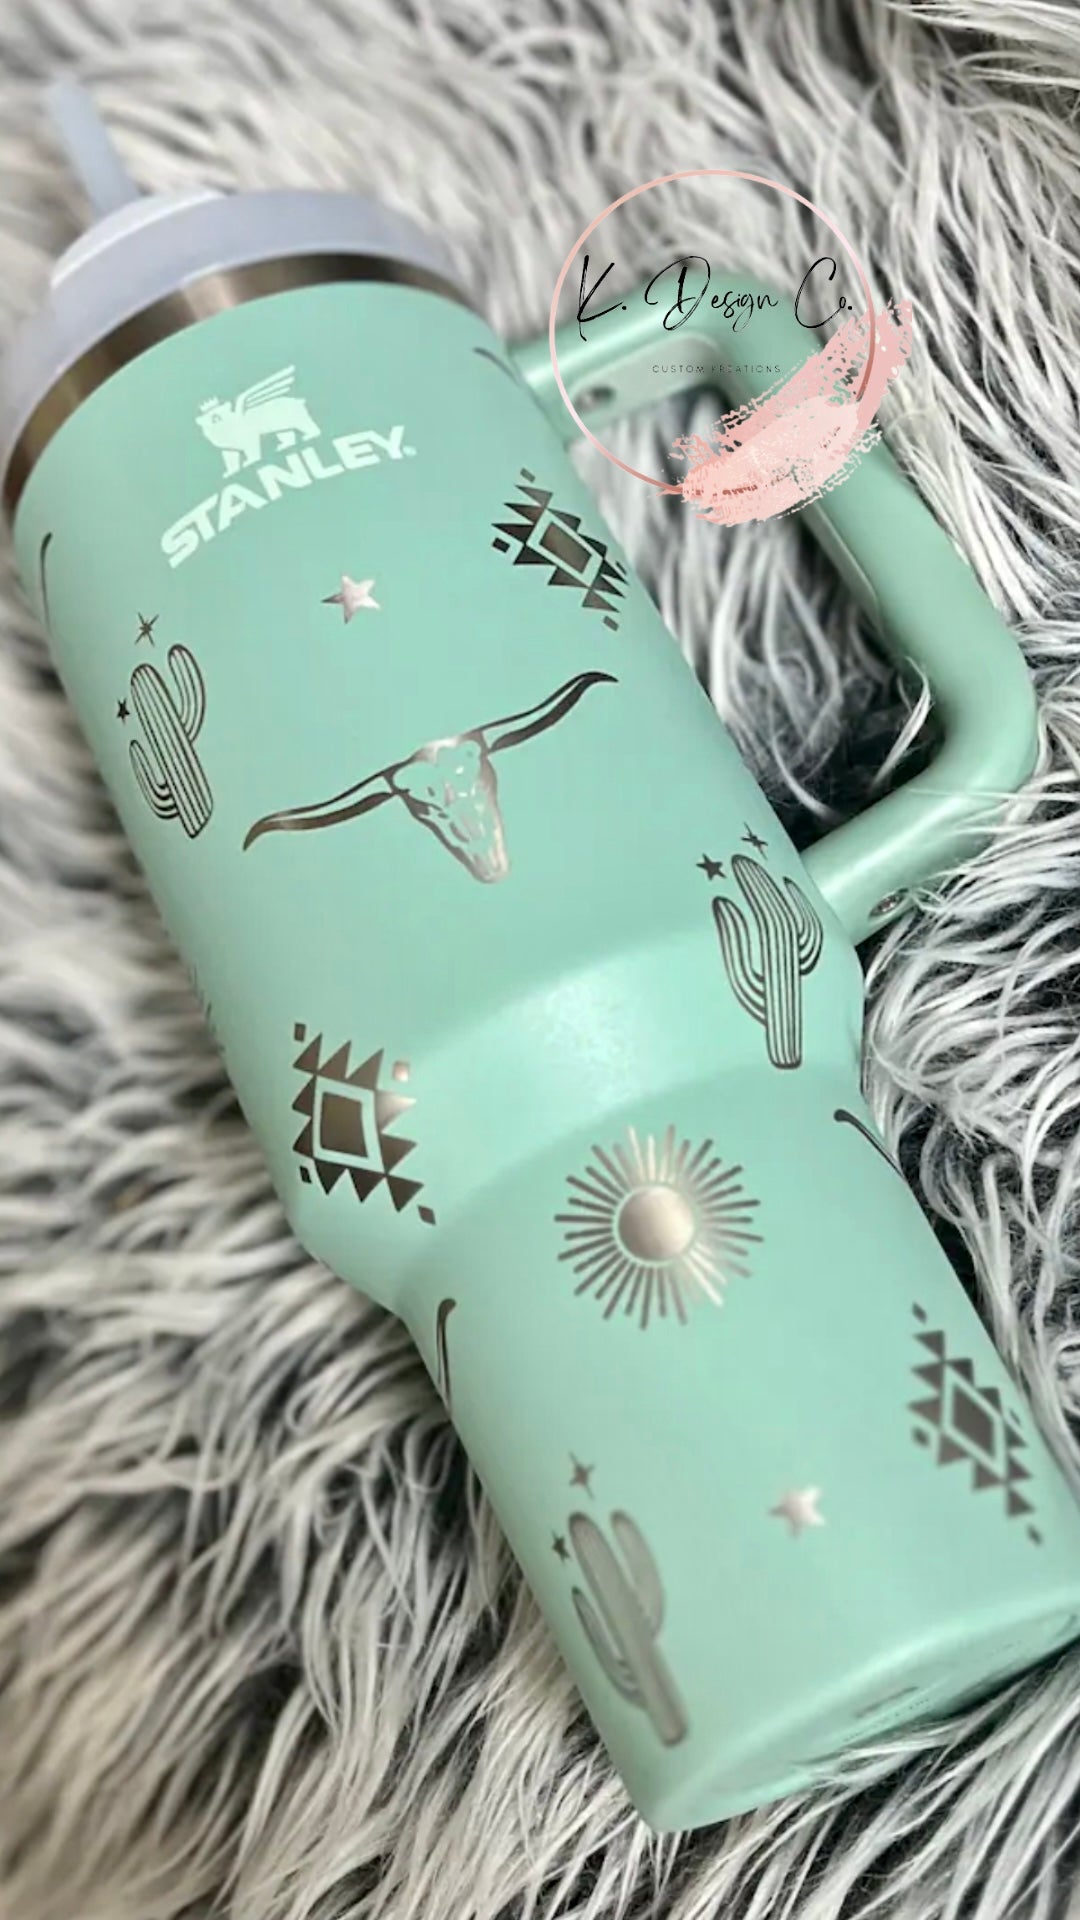 Stanley 40oz Tumbler, Leopard Tumbler, Personalized Stanley, Gift